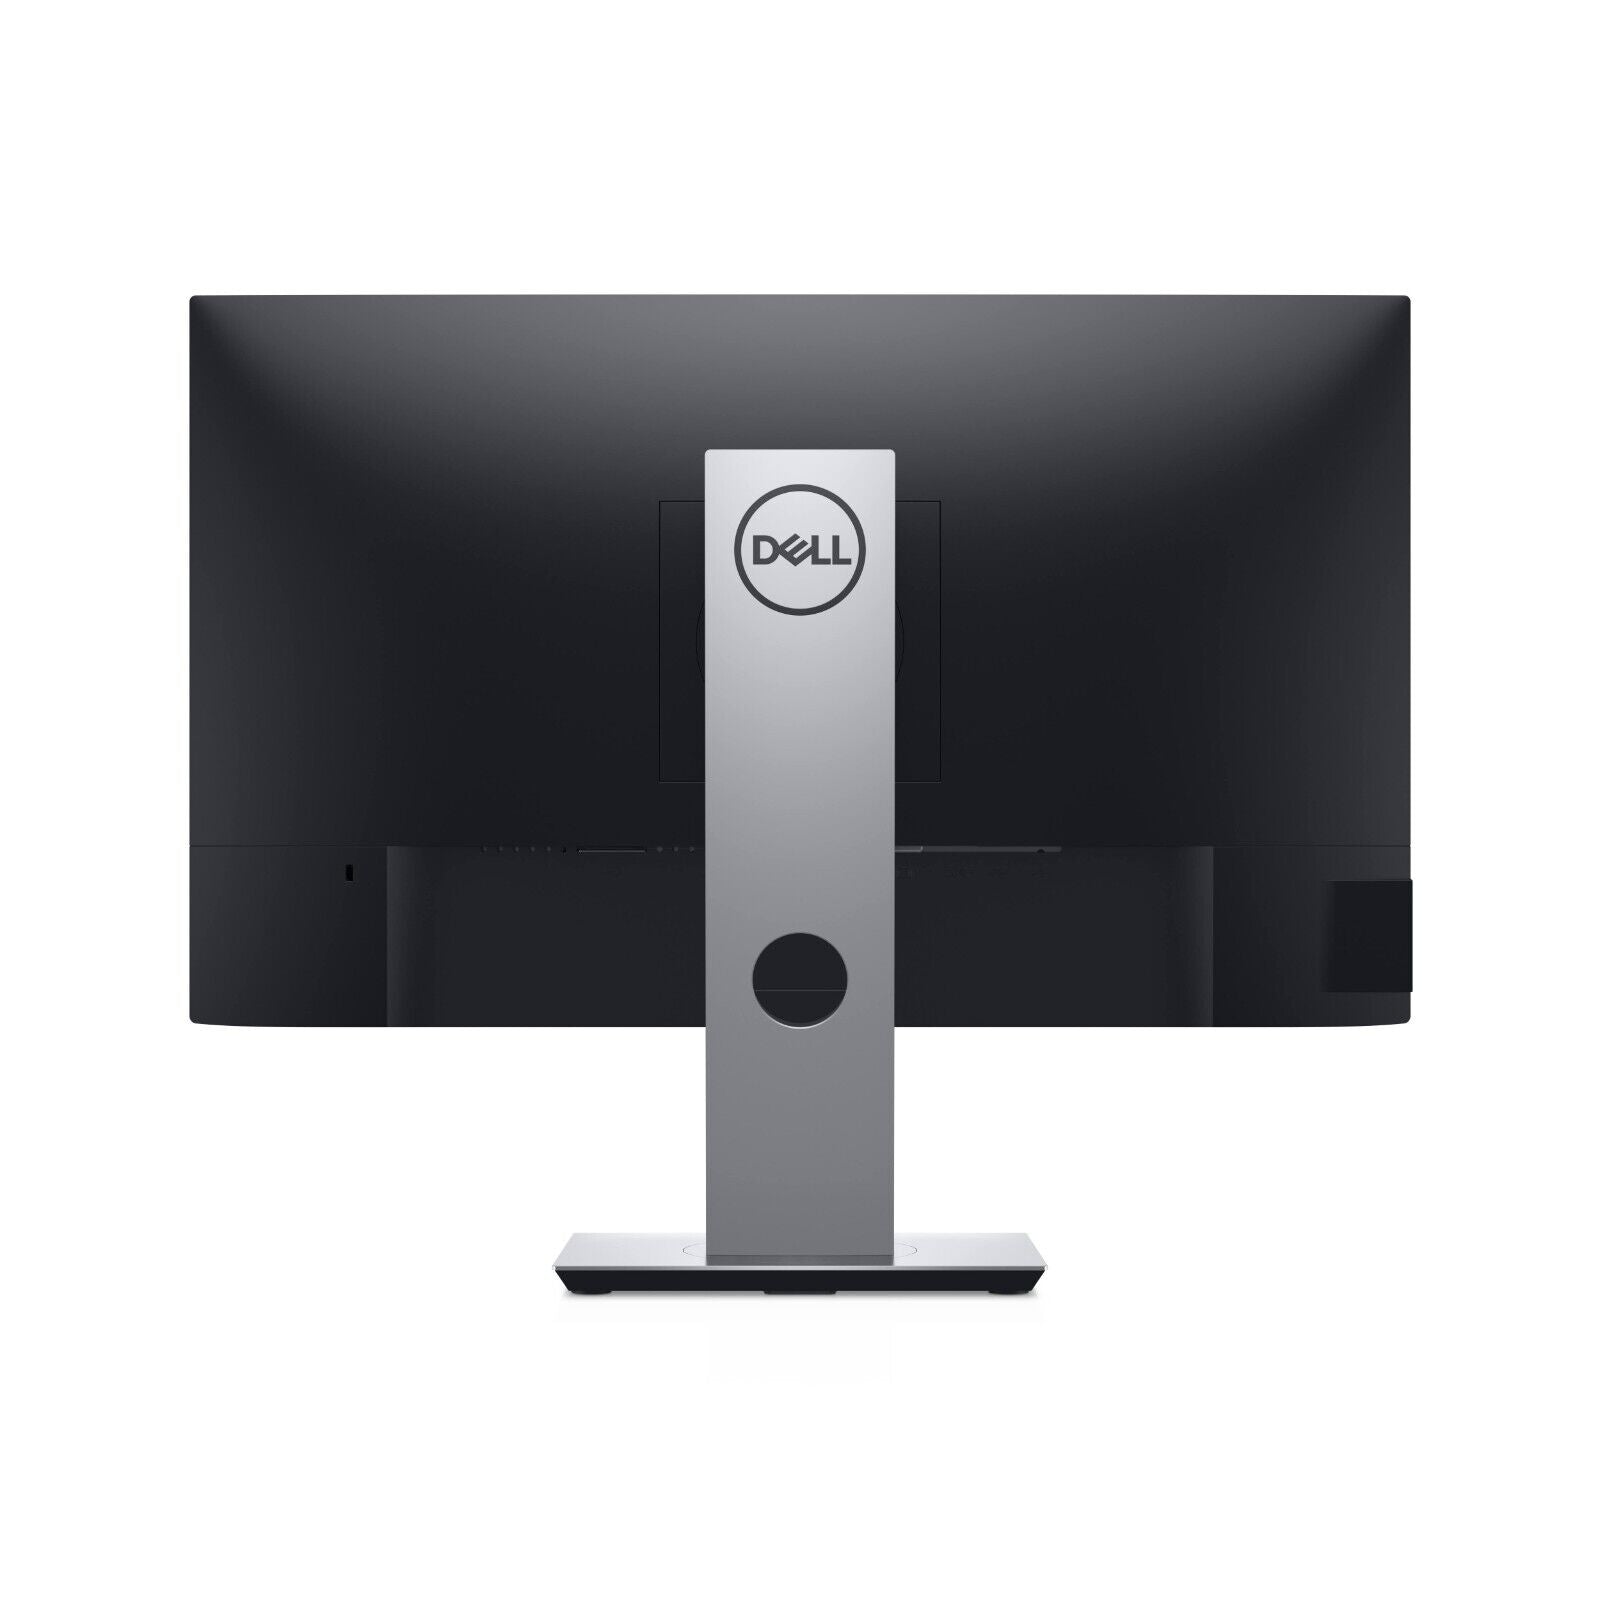 Dell P2419H 23.8" FHD 1920x1080 IPS LED Monitor 250 cd/m2 5ms